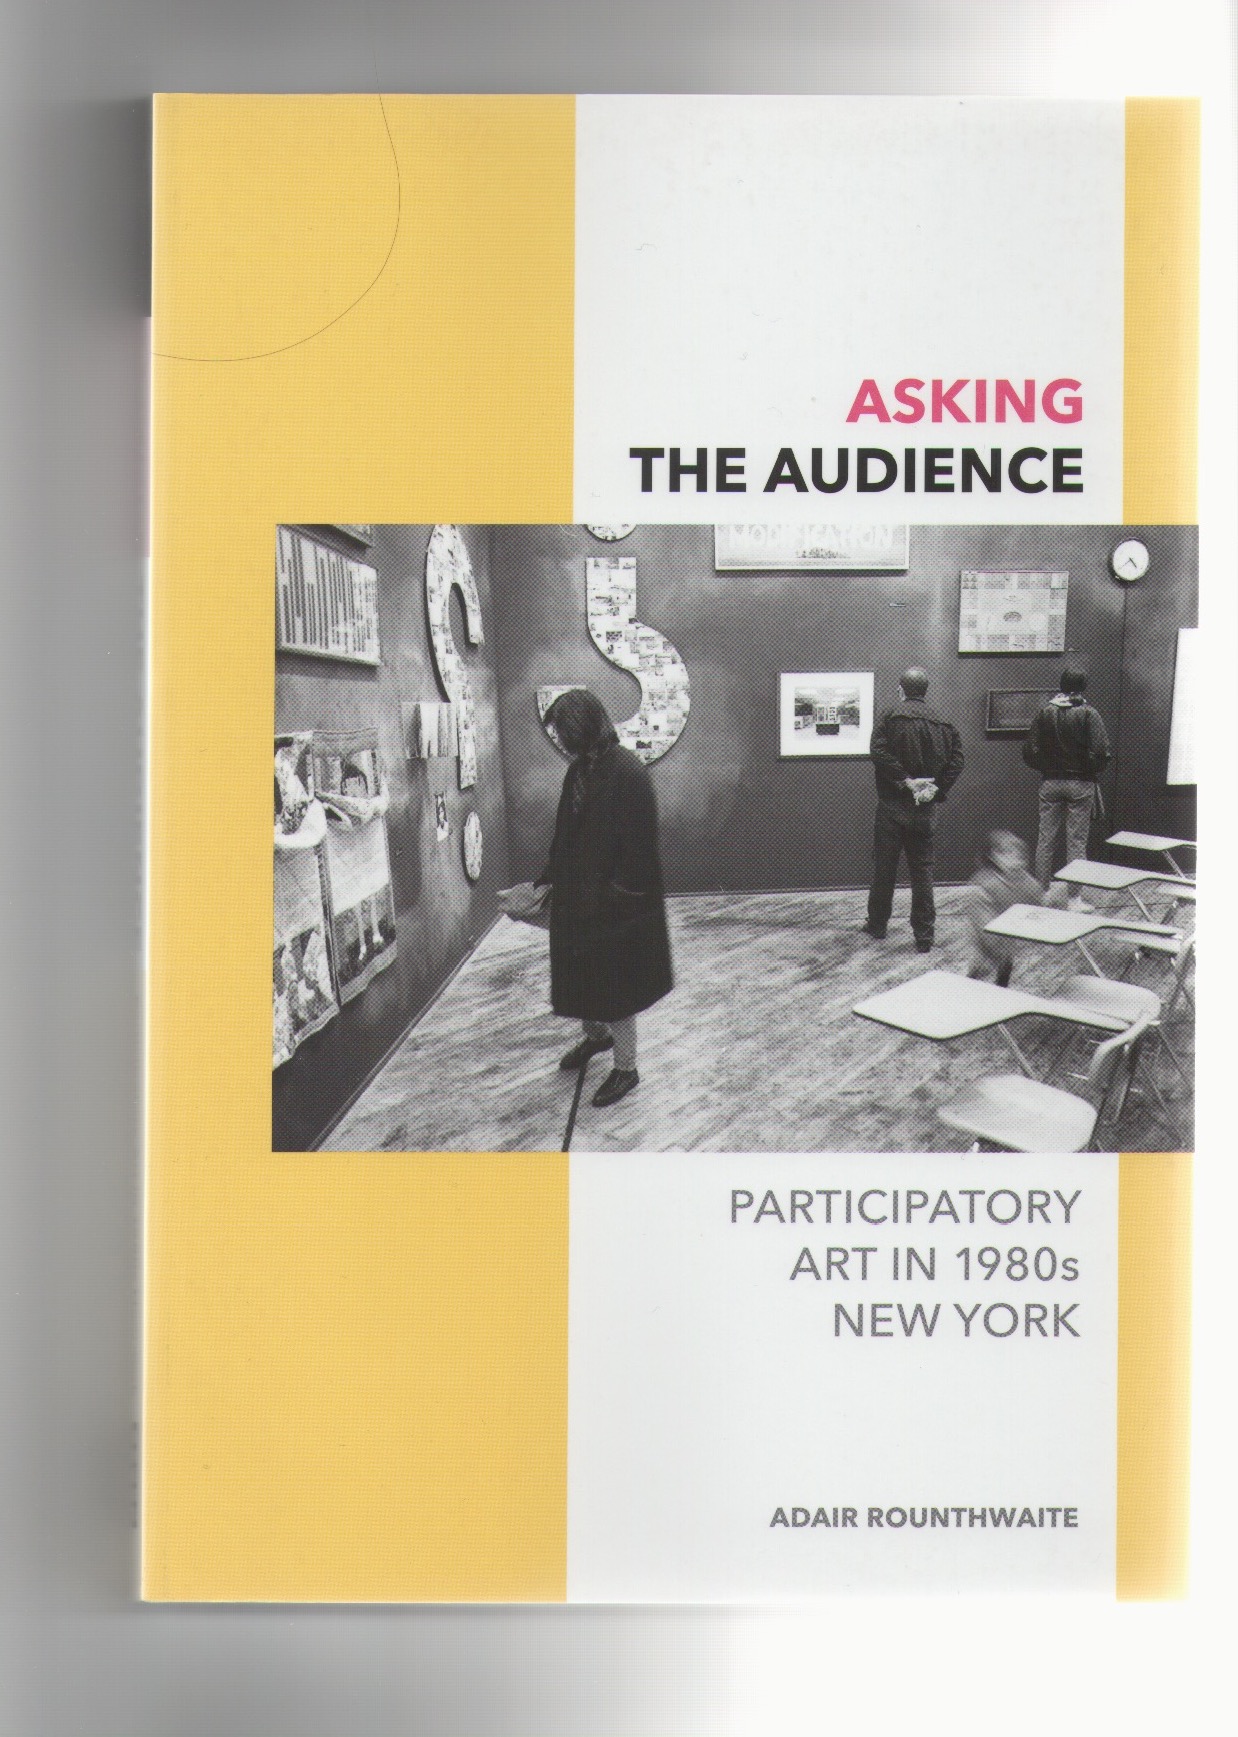 ROUNTHWAITE. Adair - Asking the audience - Participatory art in 1980s New York